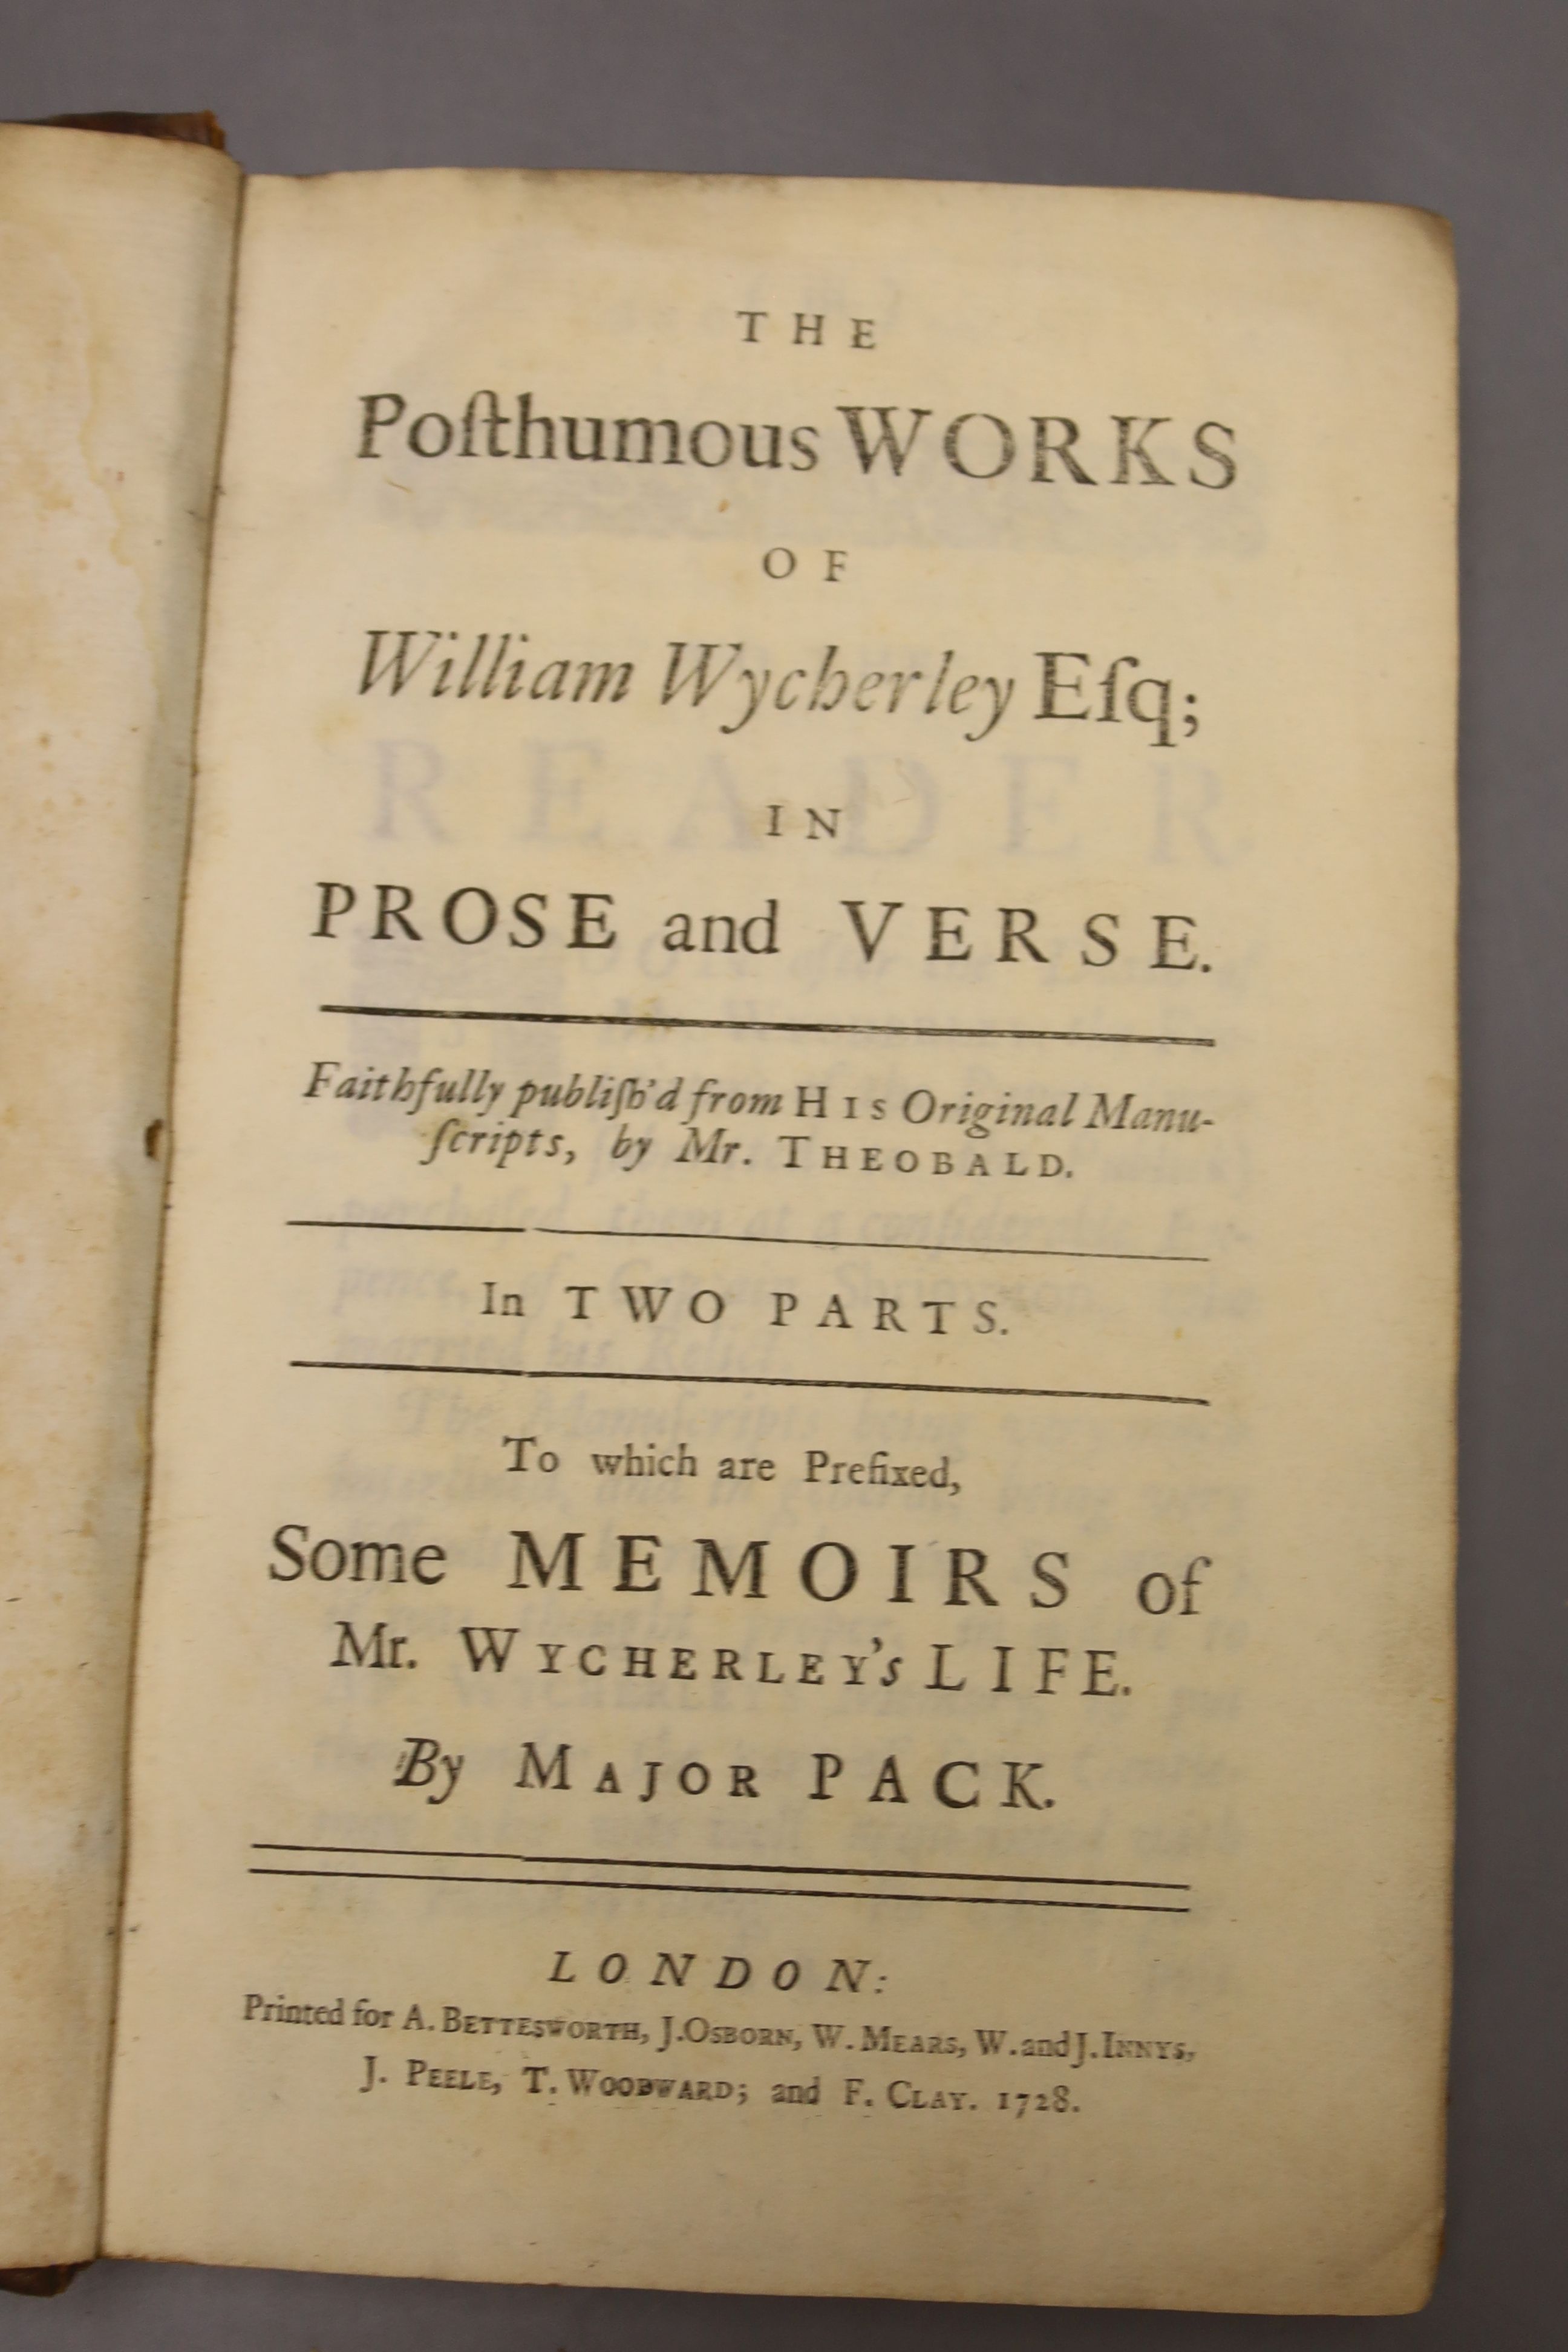 Wycherley, William – The Posthumous Works … in Prose and Verse … to which are prefixed, Some Memoirs of Mr Wycherley’s Life by Major Pack